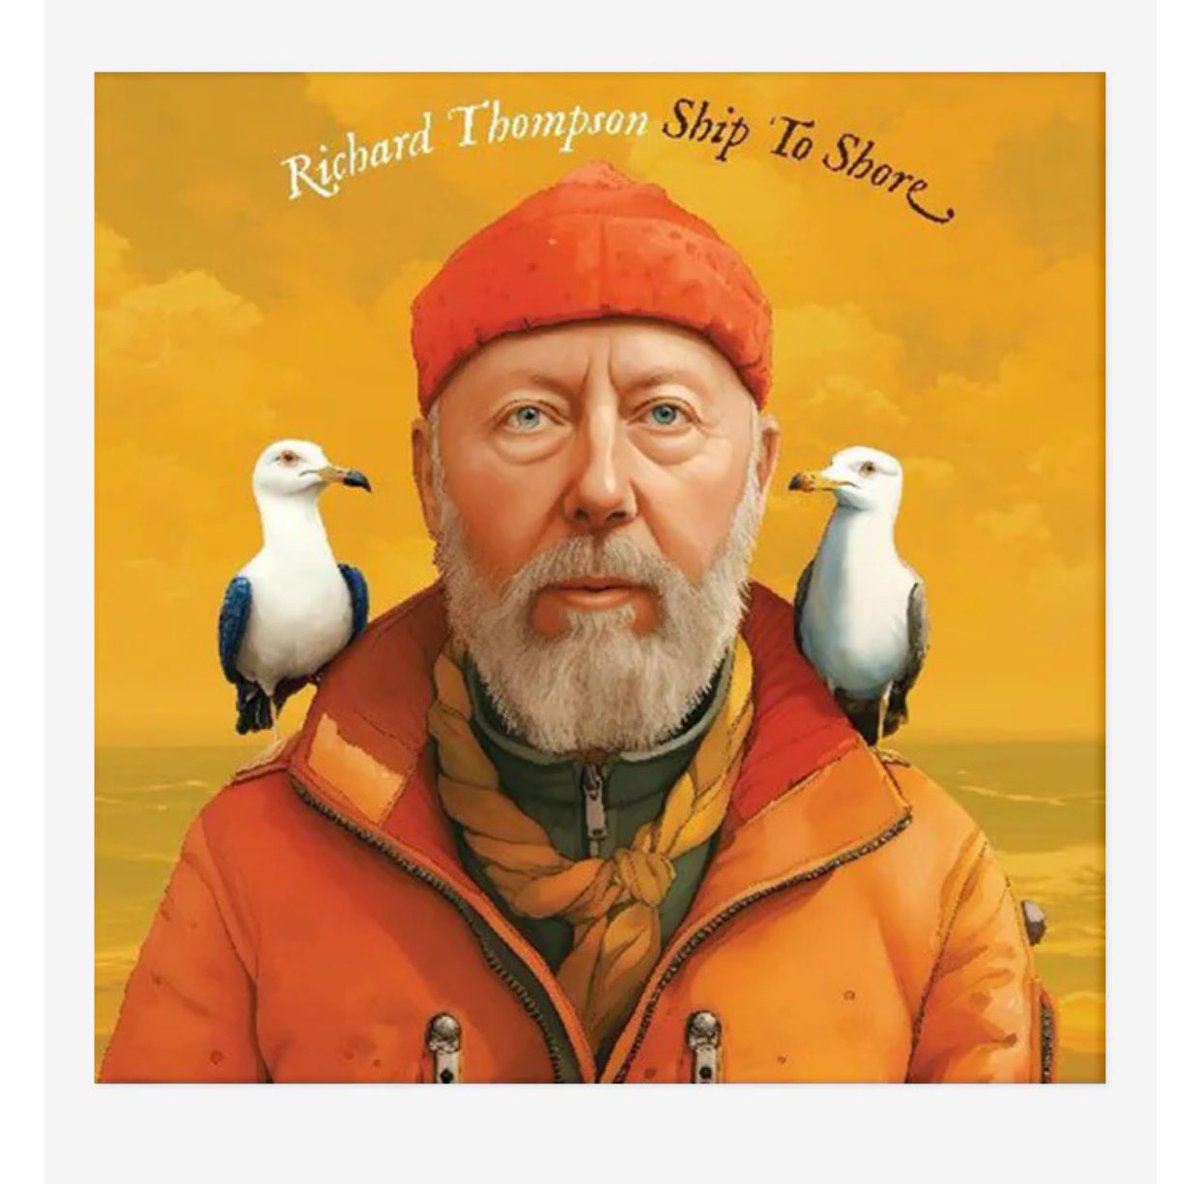 Richard Thompson!
Autographs and Music!!
Pick up Ship to Shore and receive RT’s autograph with purchase. Thanks Richard!

newburycomics.com/products/ship-…